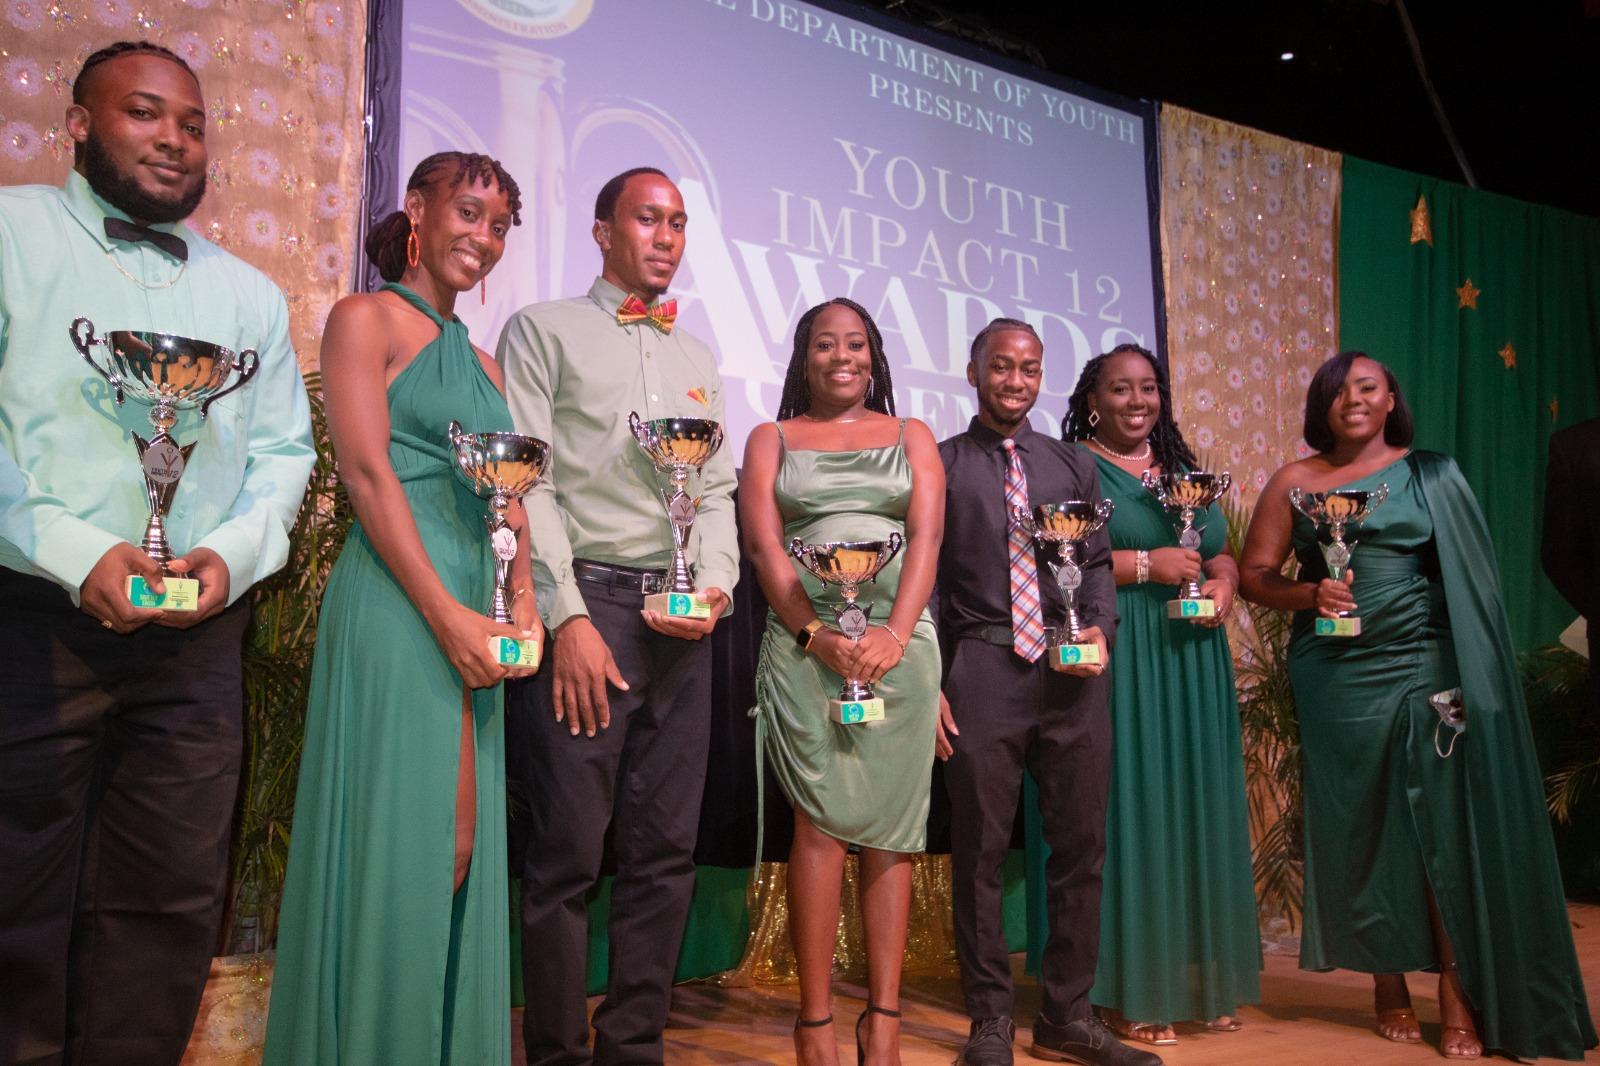 Seven of the nine awardees present at the Youth Impact 12 Awards Ceremony at the Nevis Performing Arts Centre on November 04, 2021 (l-r) Brendon Claxton for Education and Lifelong Learning; Mervil Jahnel Nisbett for Patriotism; Shakir Stapleton for Youth Development; Yahsulazie Flanders-Grant for Entrepreneurship; Davien Griffin for Youth in the Arts; Maliqua Kamau for Volunteerism; and Diandra Archibald for Volunteerism.